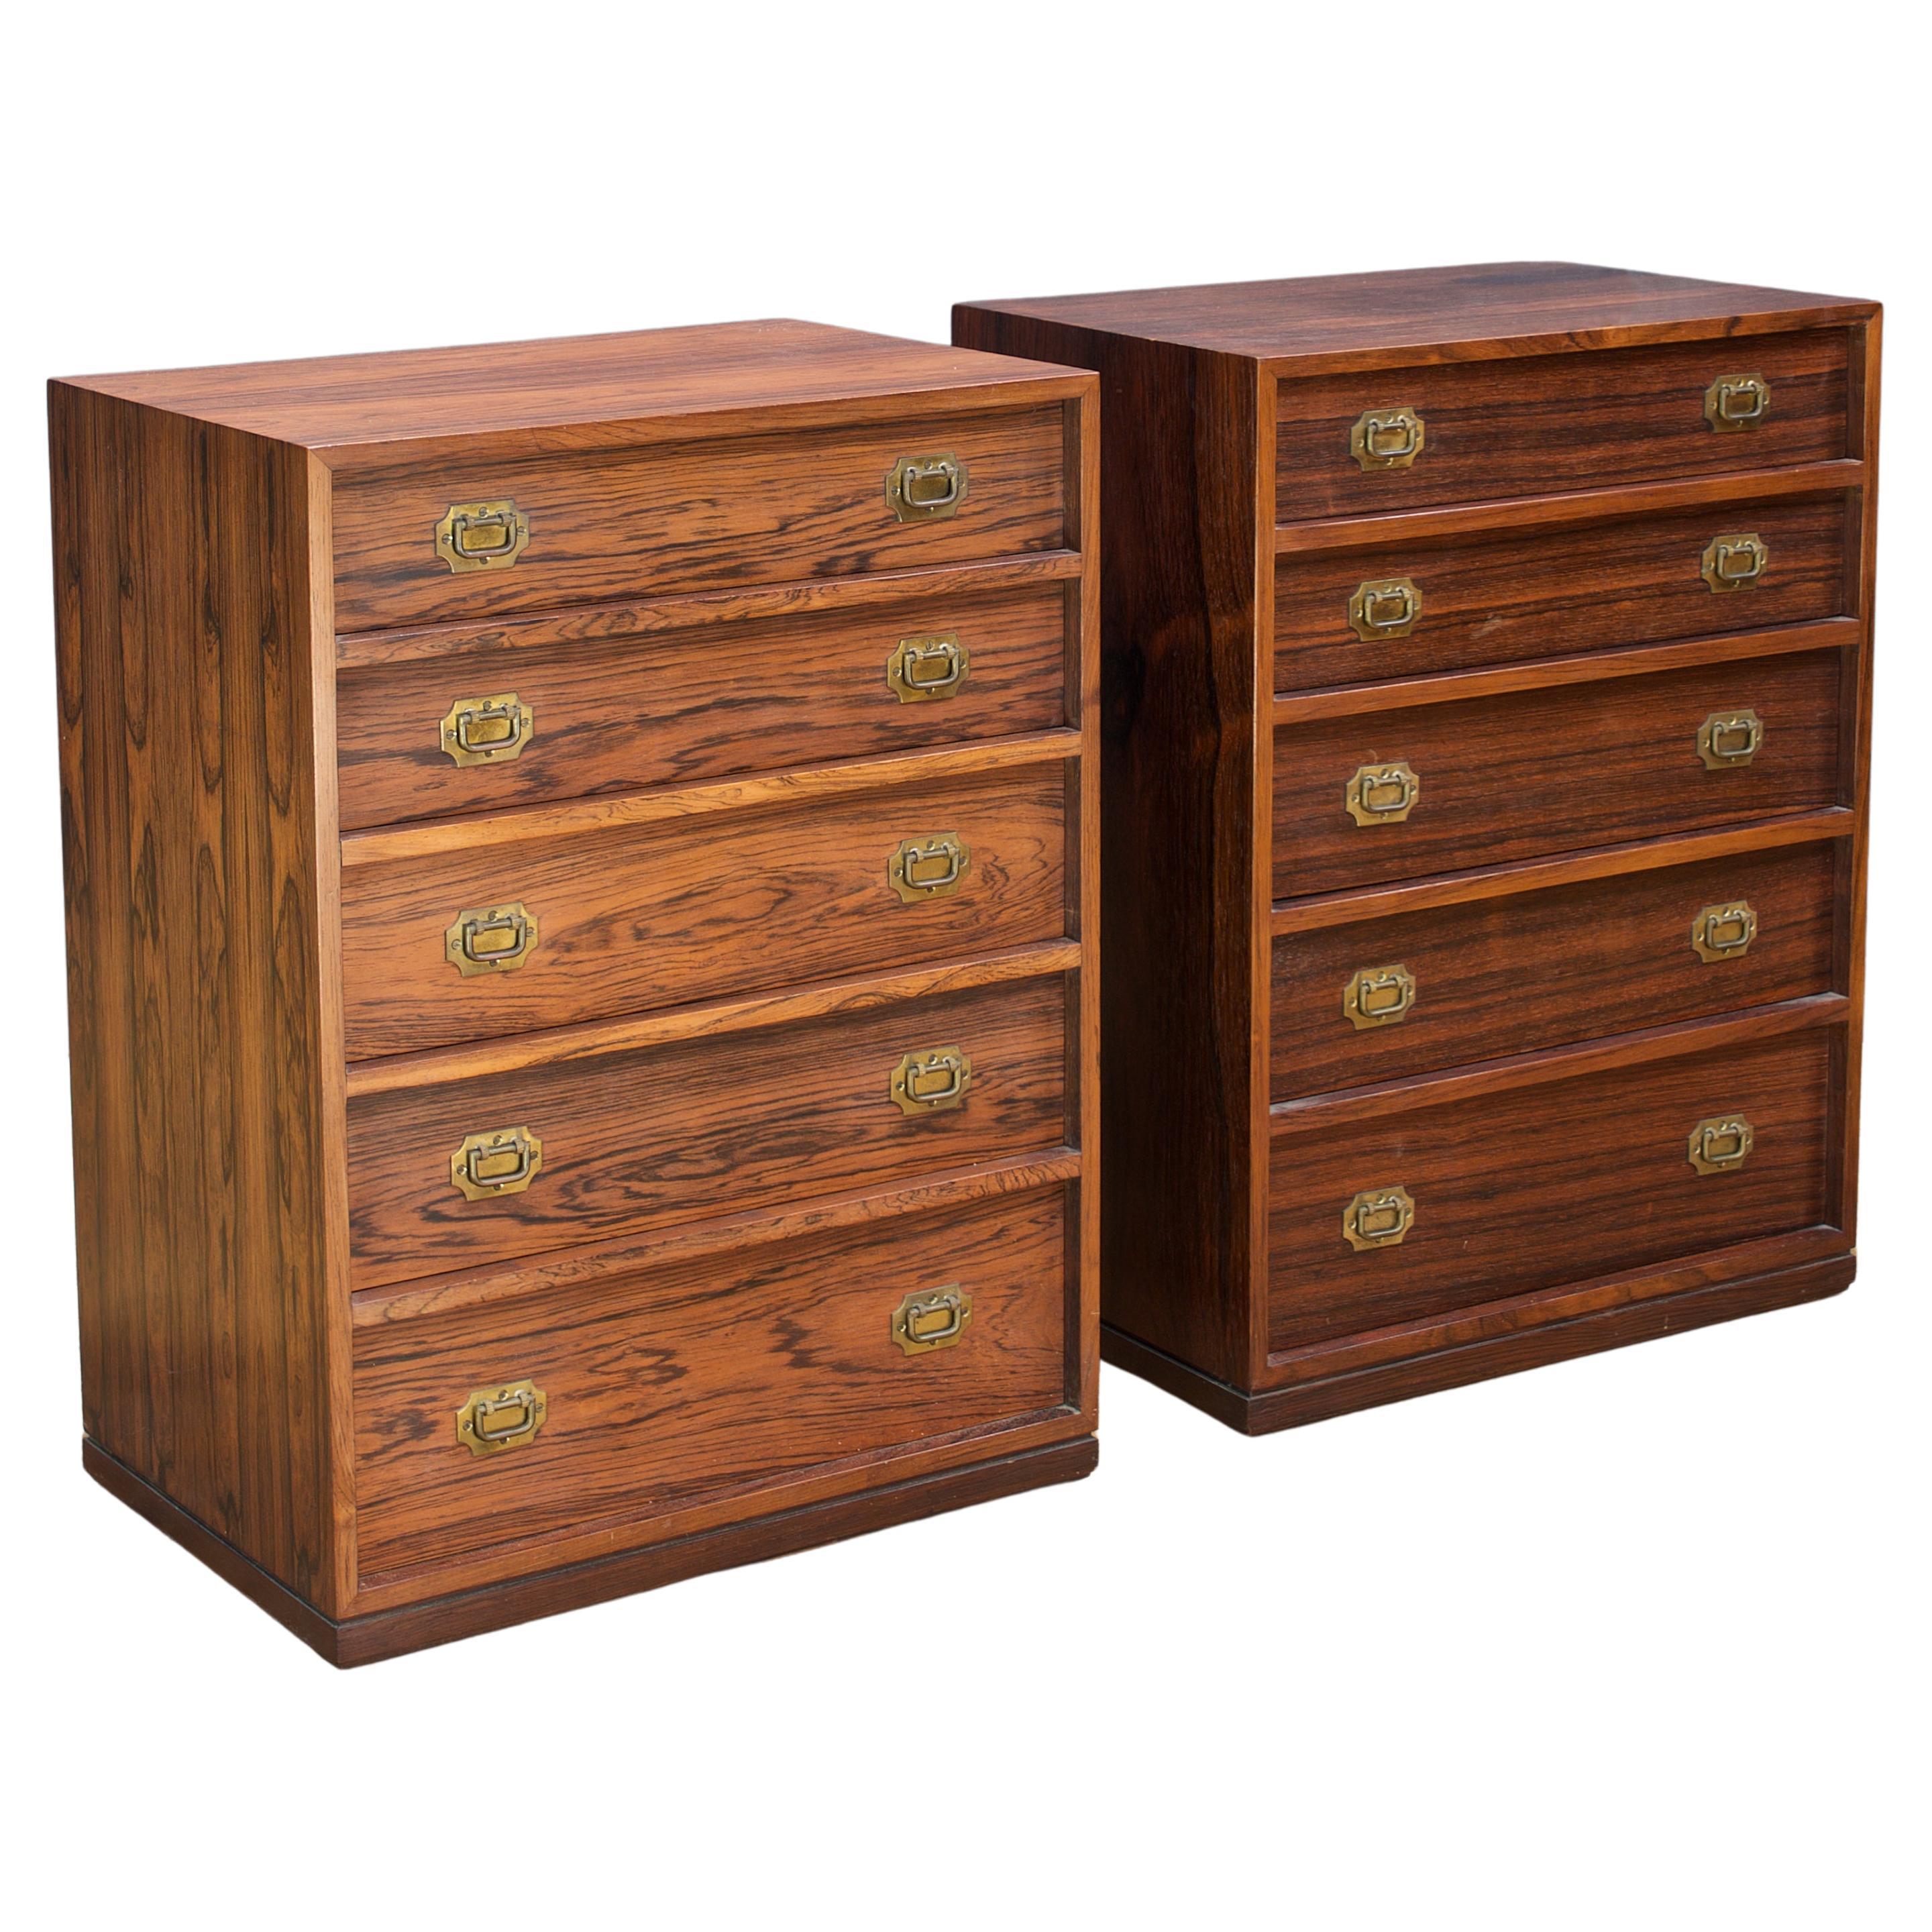 Henning Korch Rosewood Campaign Jewelry Chest Drawers Lingerie Dresser Denmark For Sale